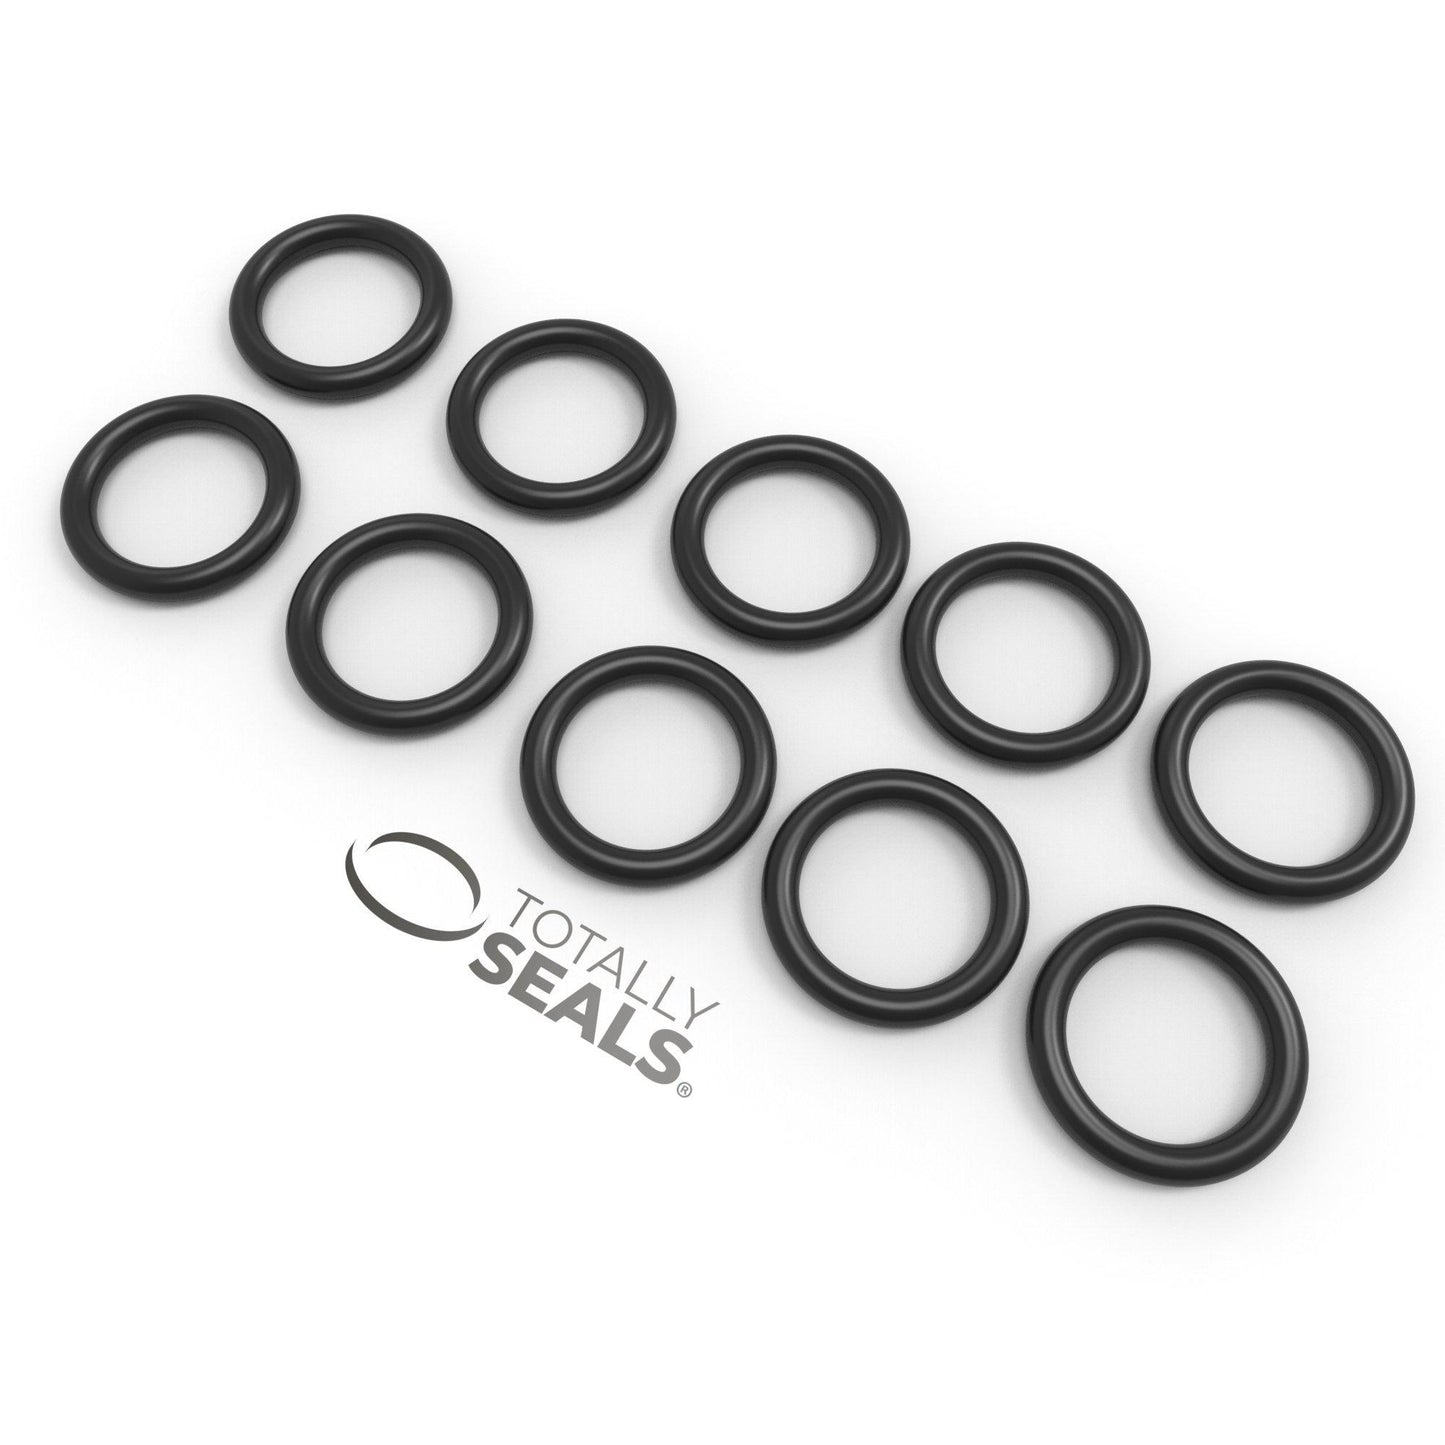 4mm x 1.5mm (7mm OD) Nitrile O-Rings - Totally Seals®